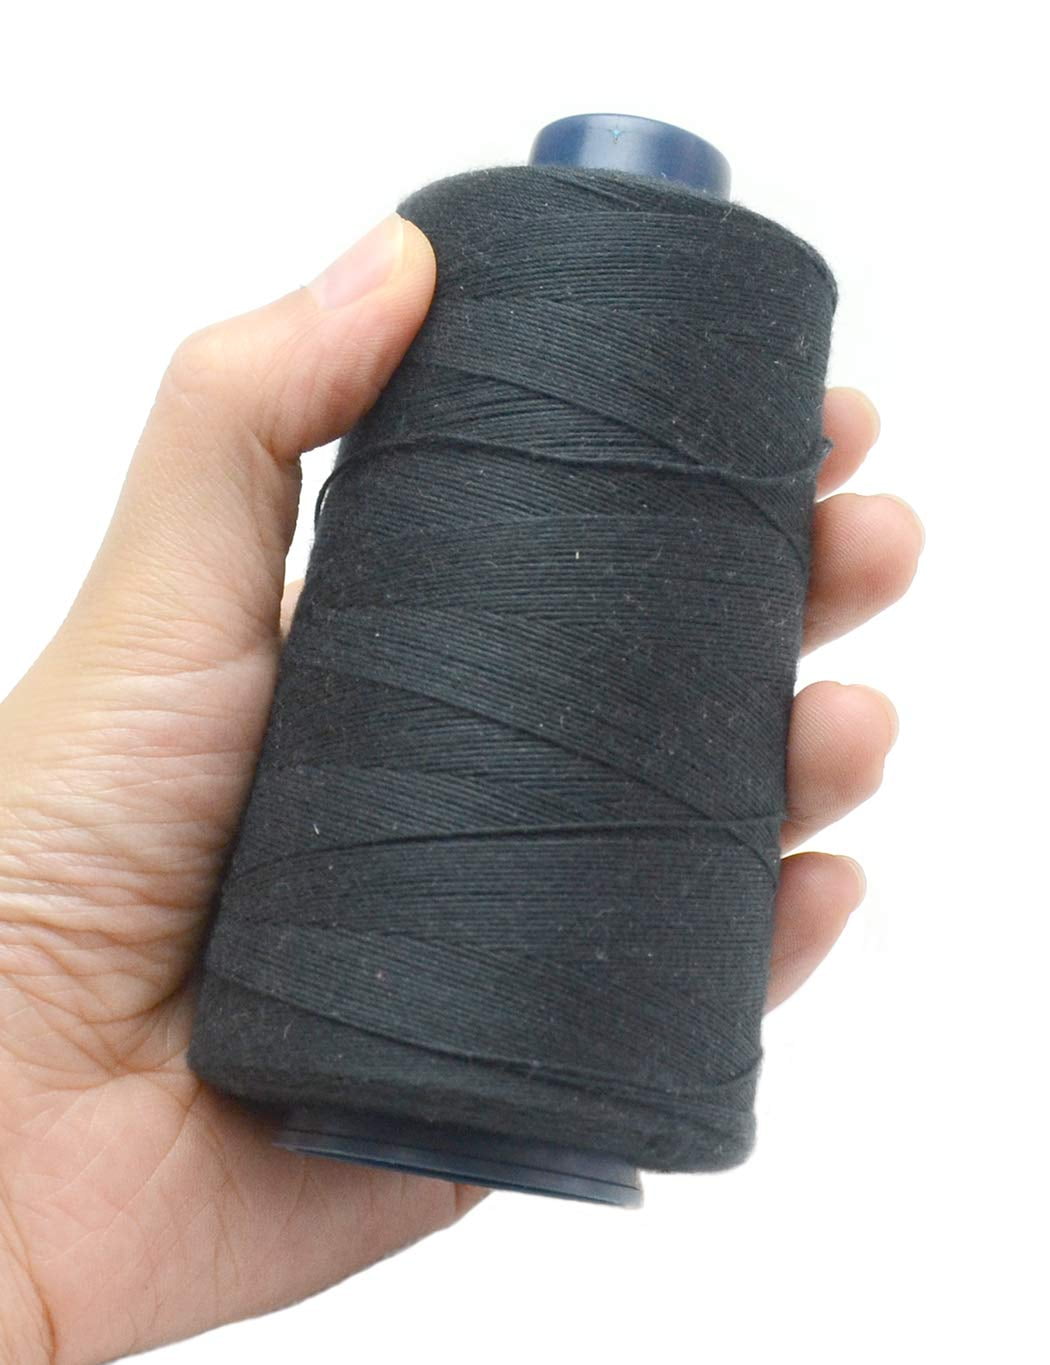 Blonde for Hair Extensions Black 4 Hair Weft Weaving Sewing Thread Brown 